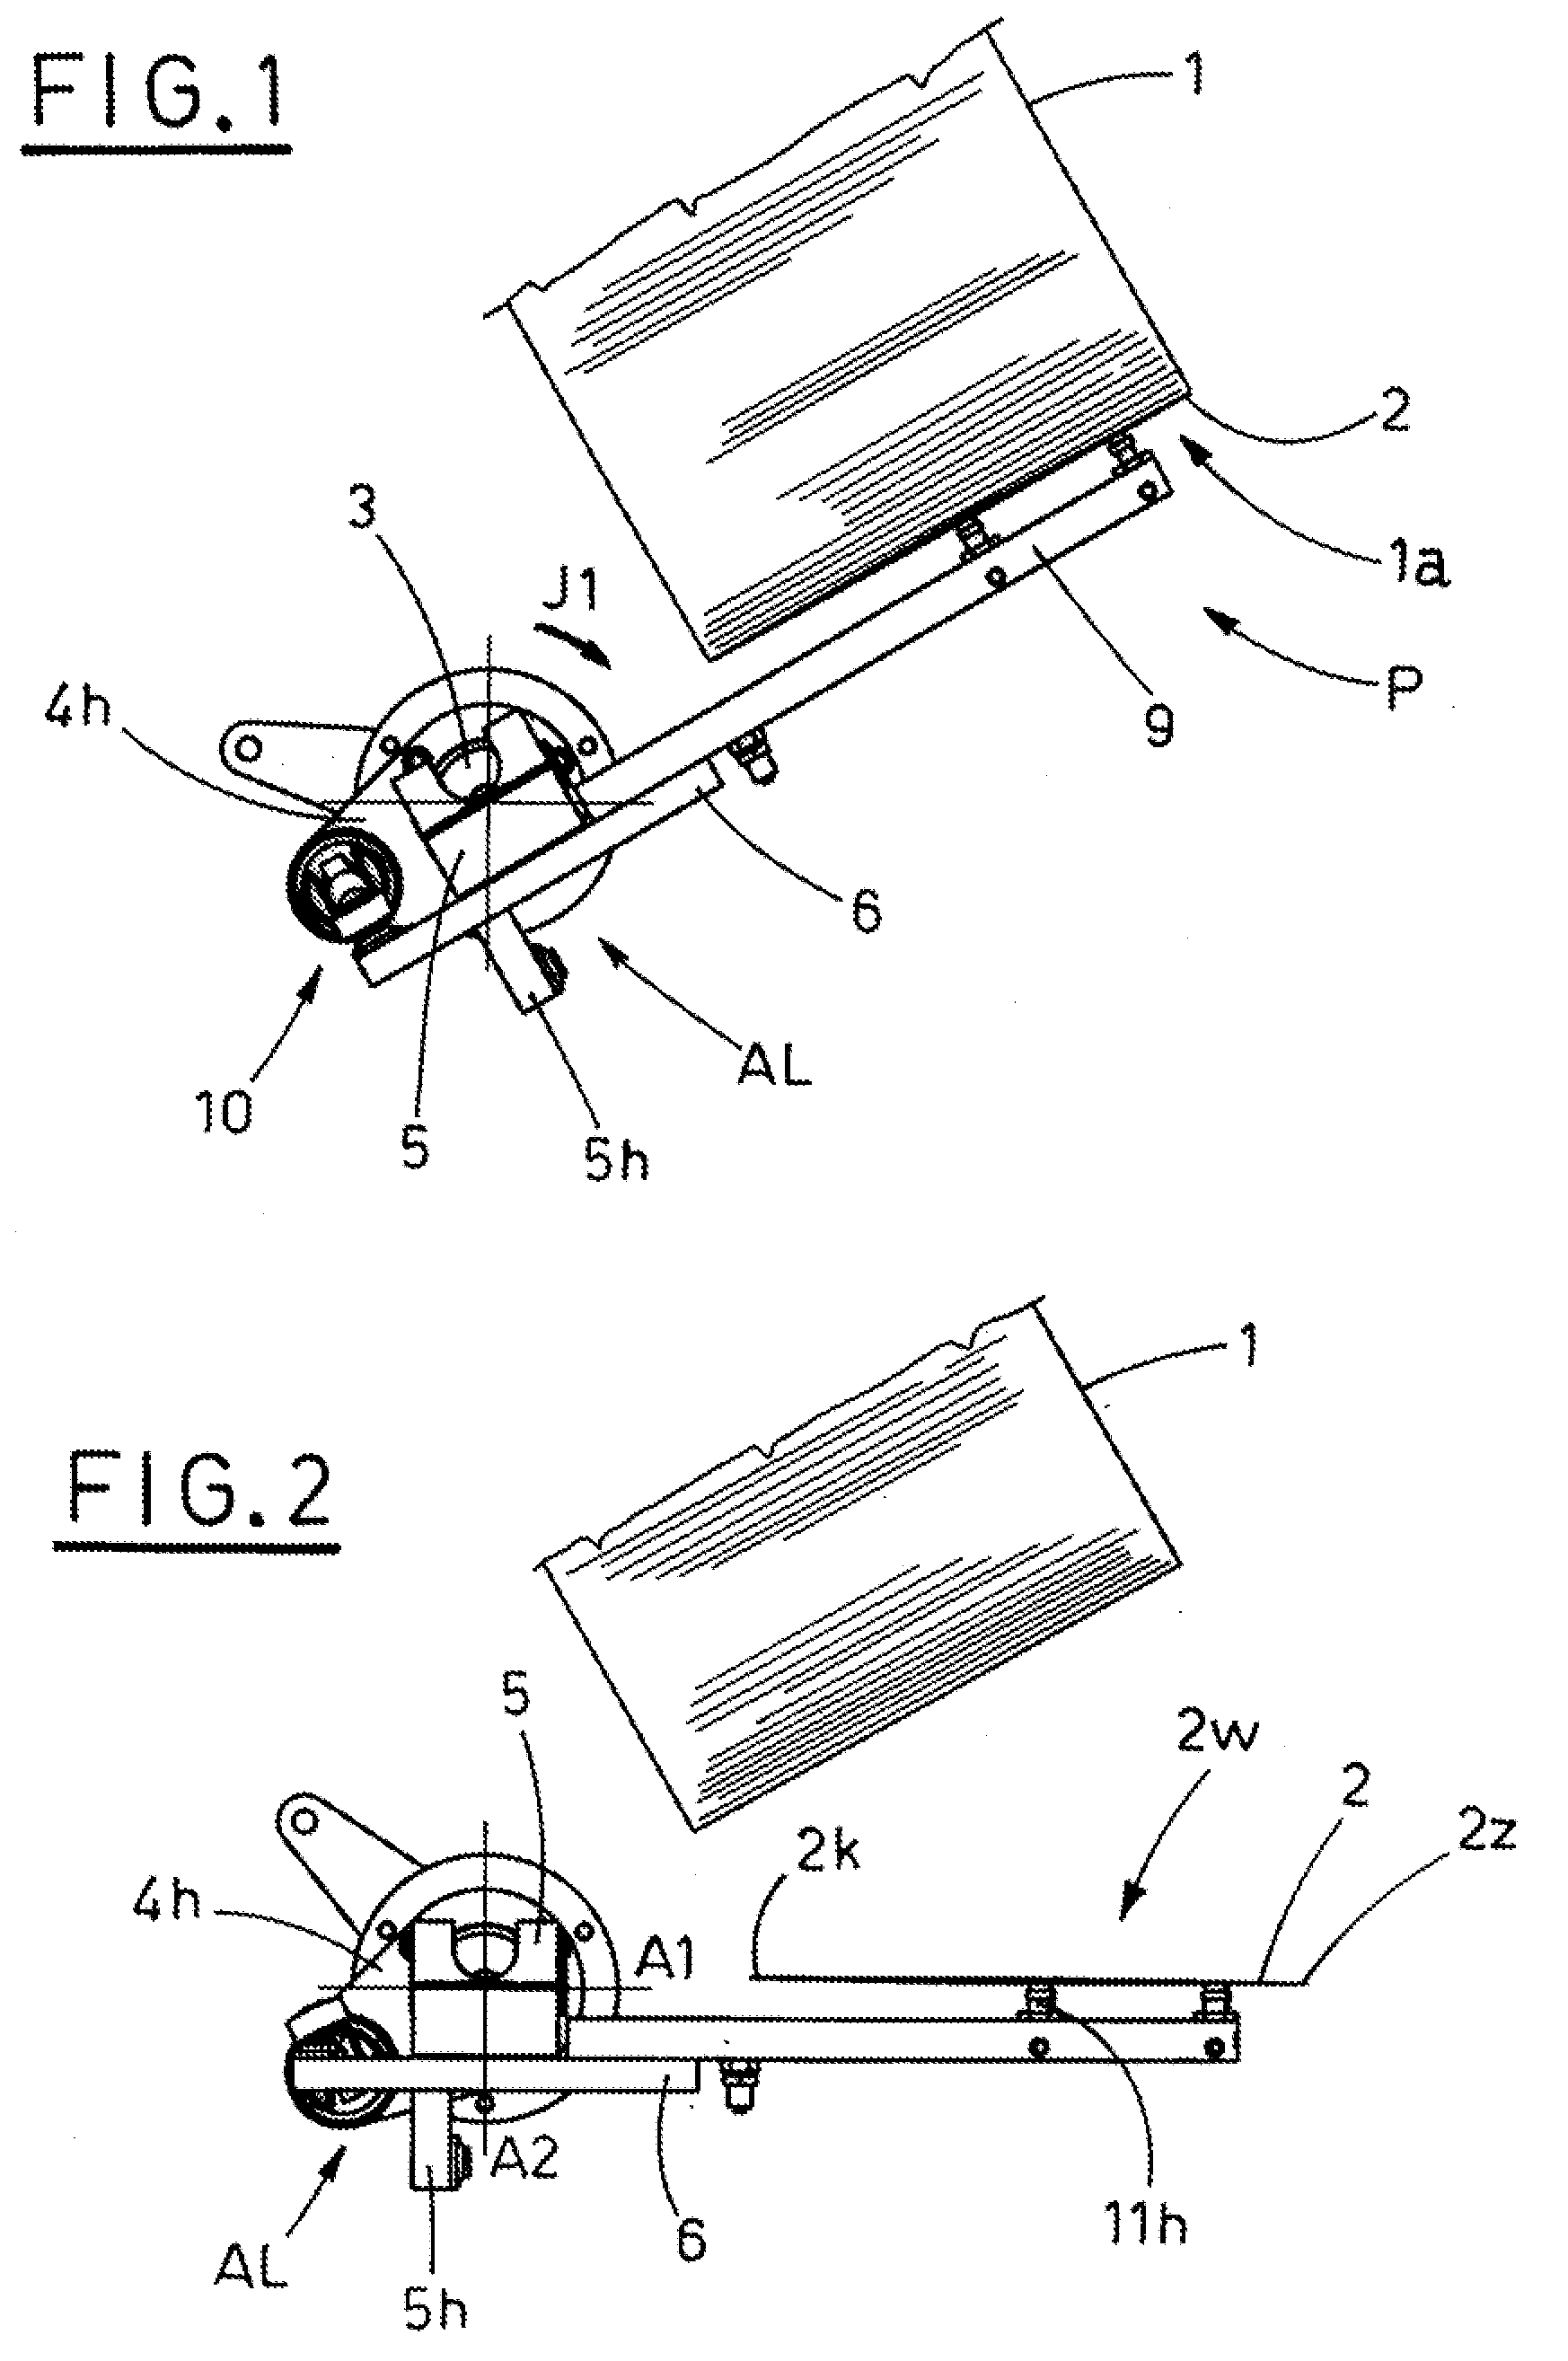 Method and an Apparatus For Picking Up Flat Folded Tubular Blanks From a Magazine and for Moving Them to an Erecting Station